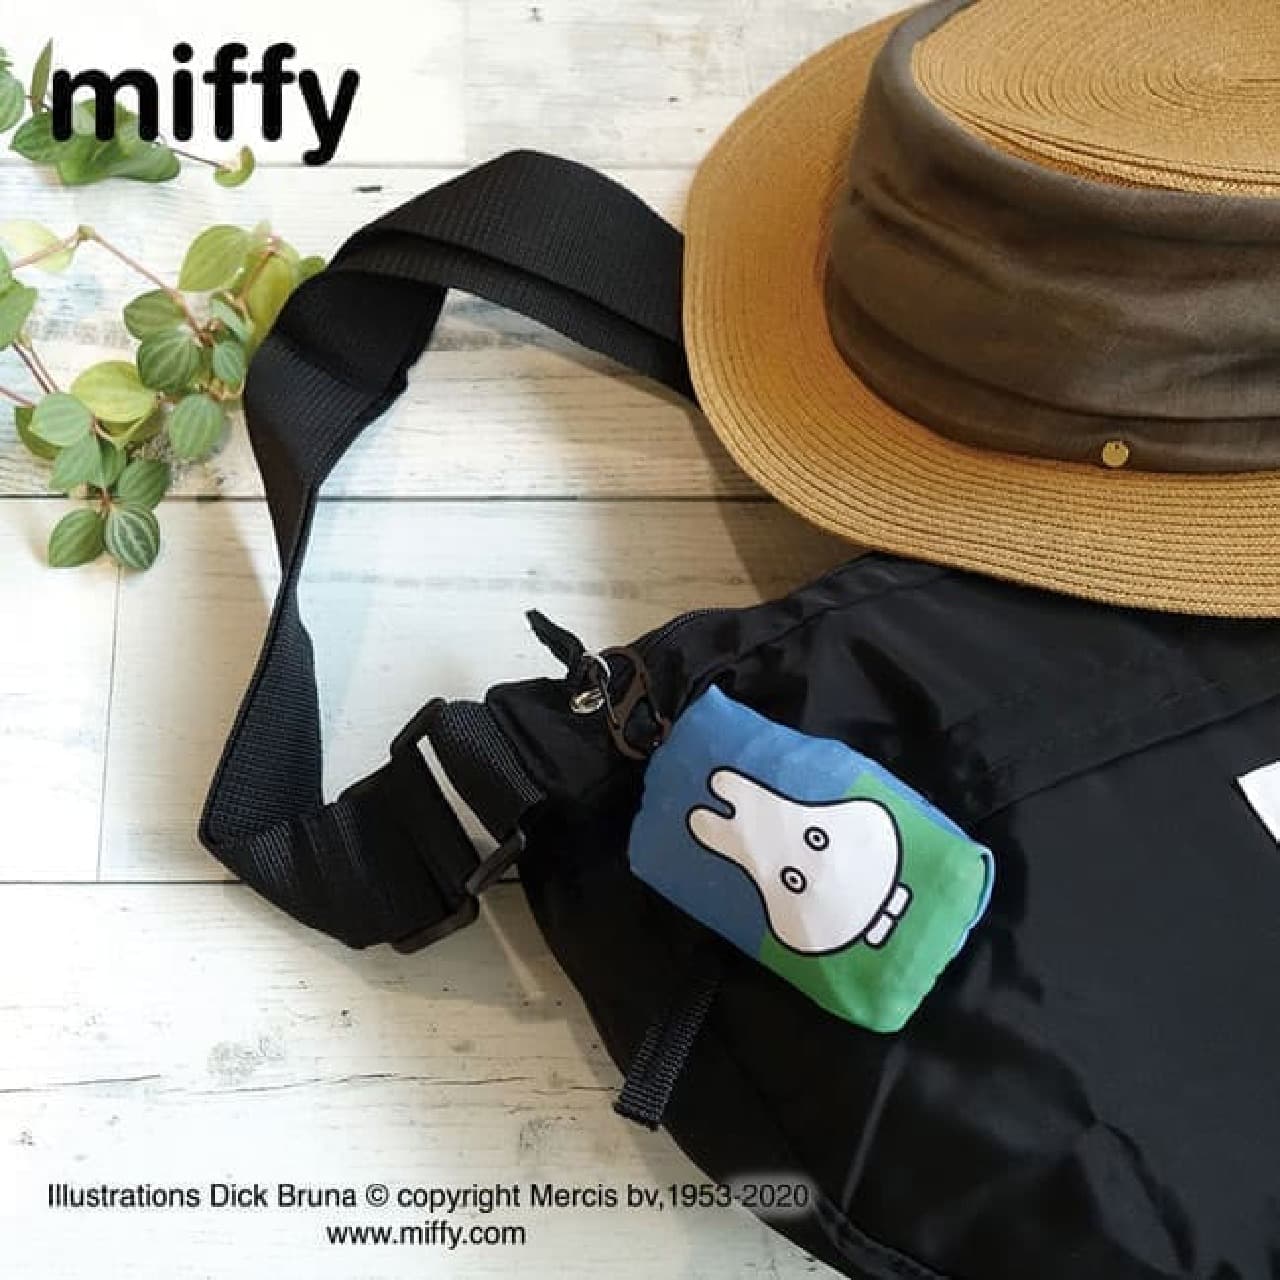 Miffy's packable eco bag